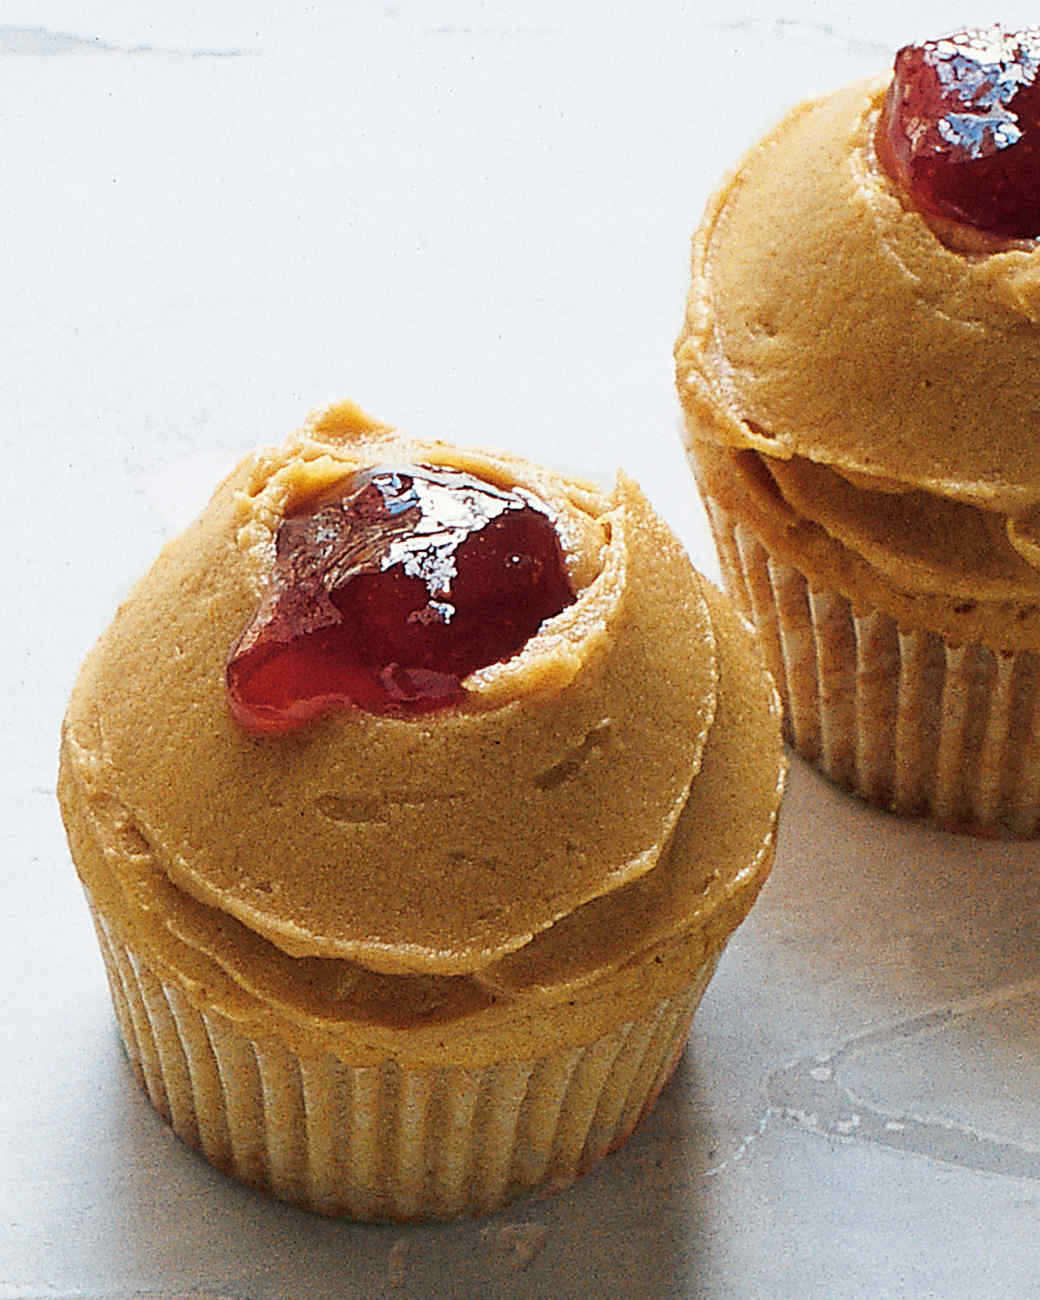 Peanut Butter and Jelly Cupcakes Recipe | Martha Stewart